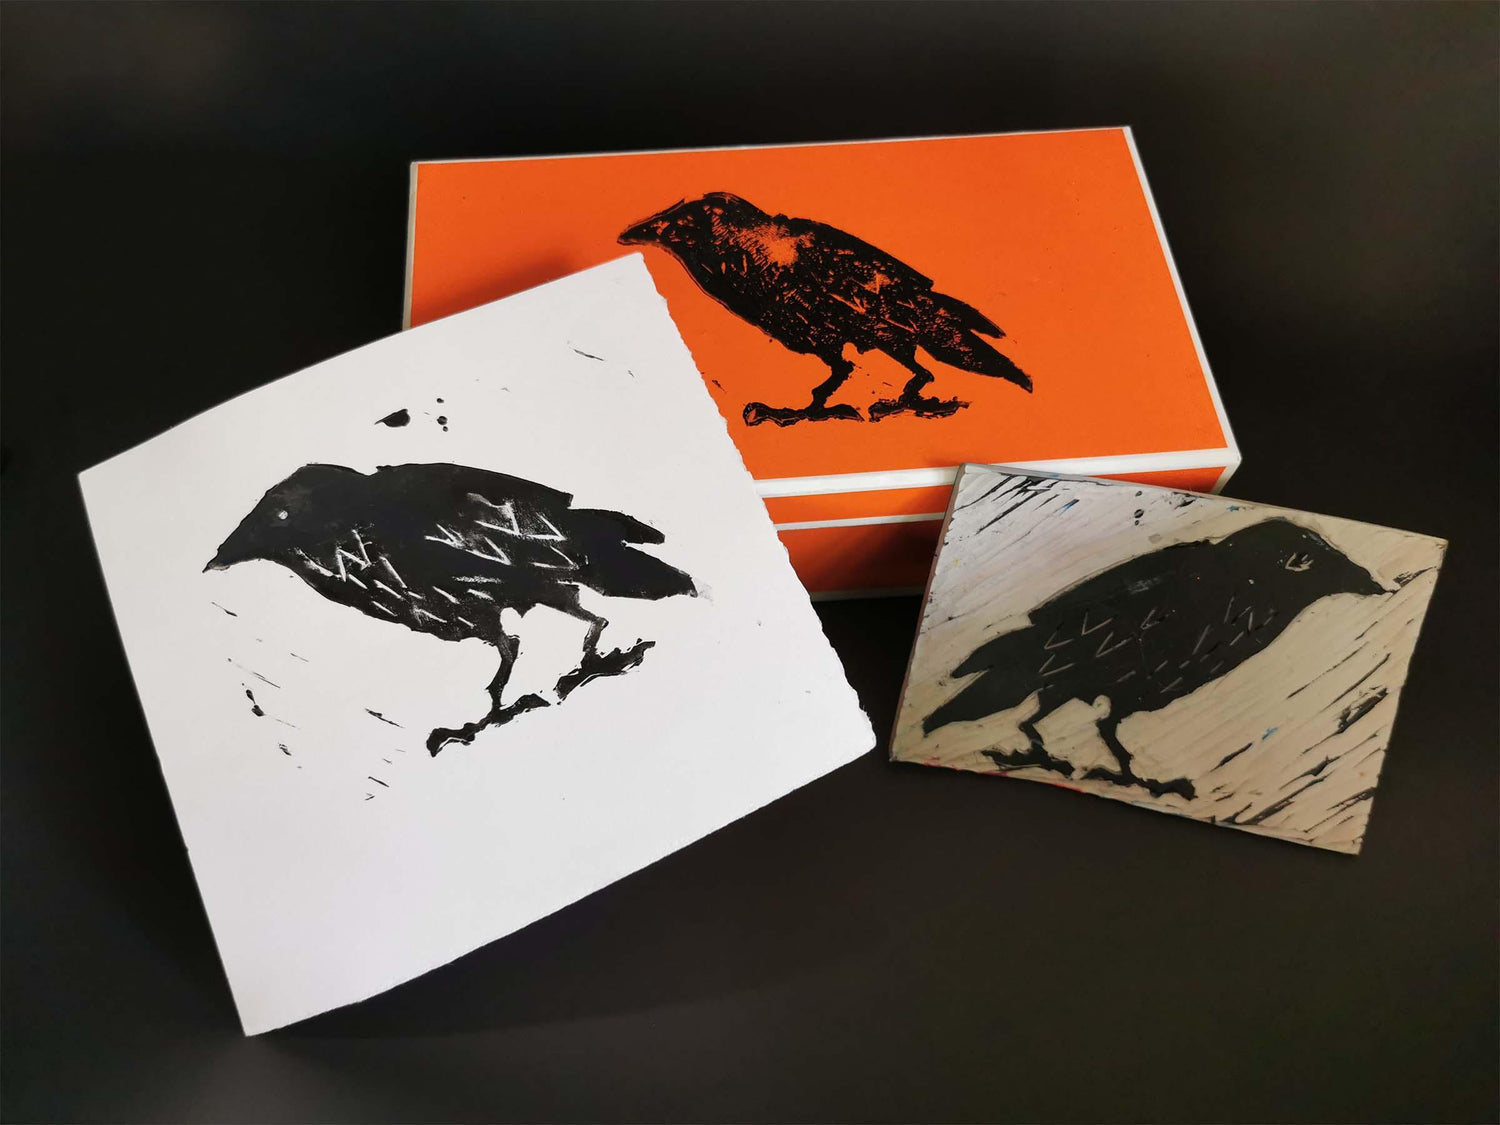 Crow pint on paper and on a orange box